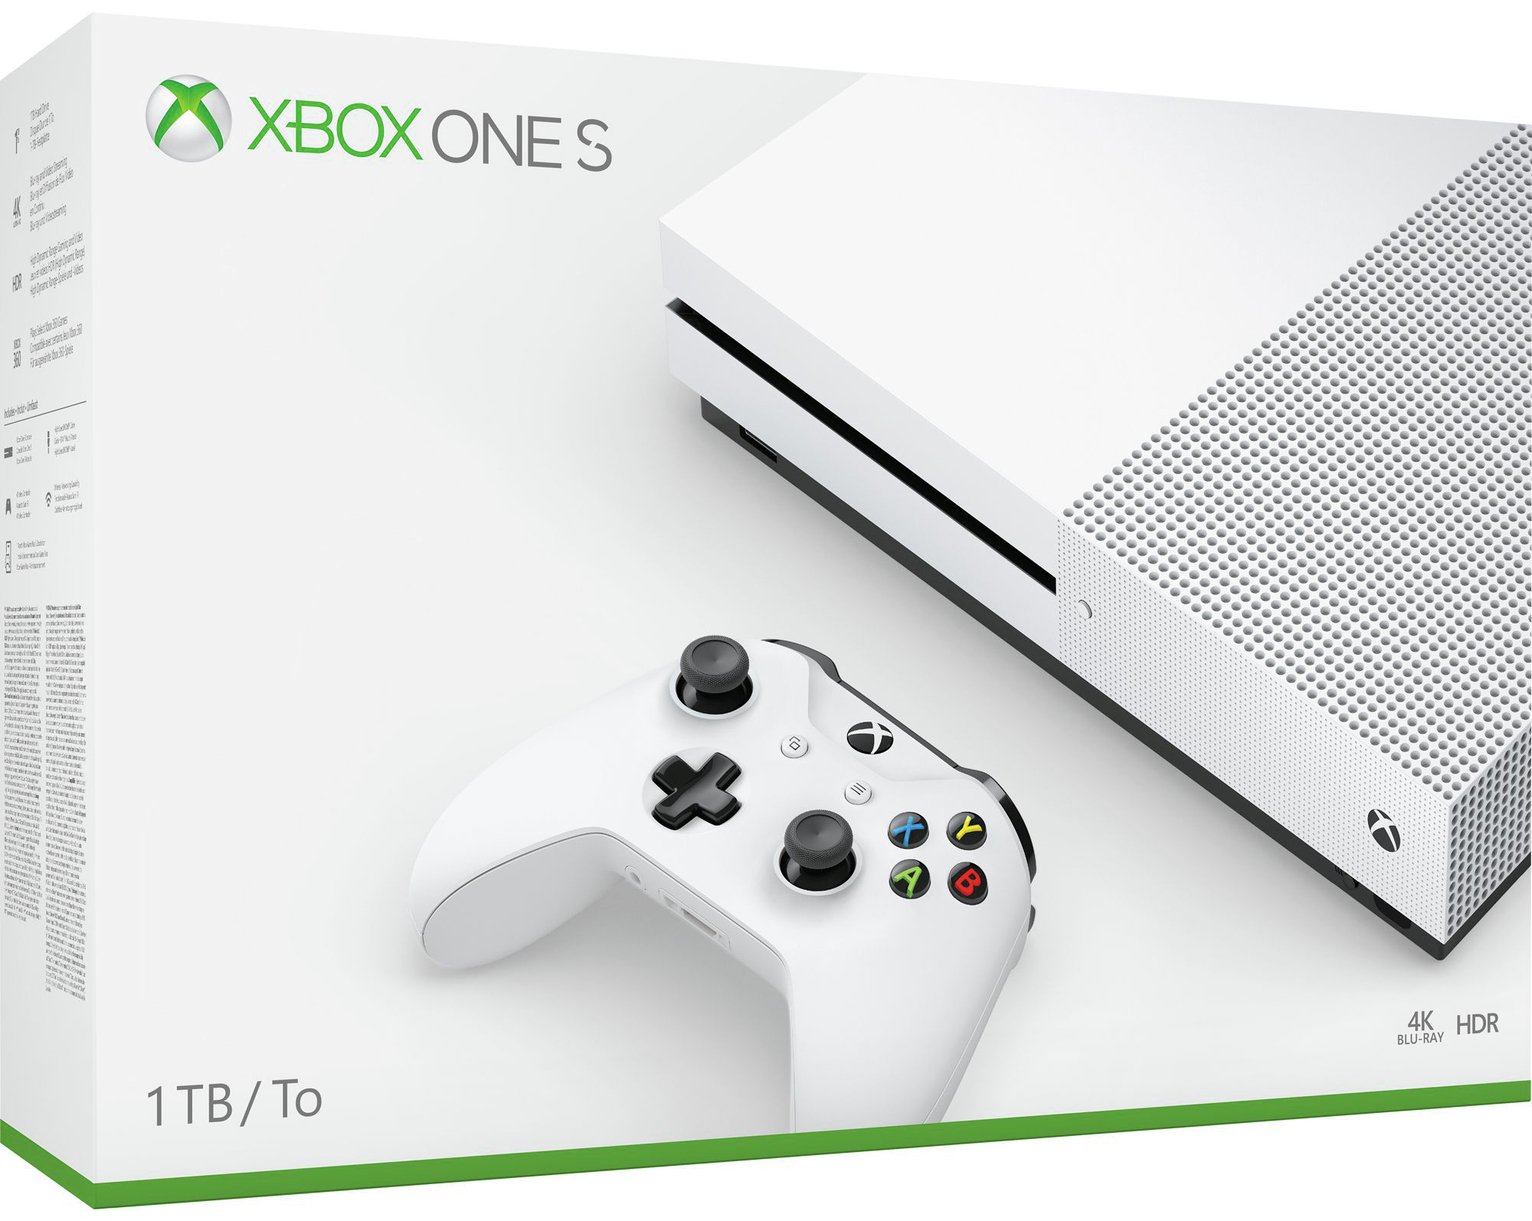 Xbox One S 1TB Console Review